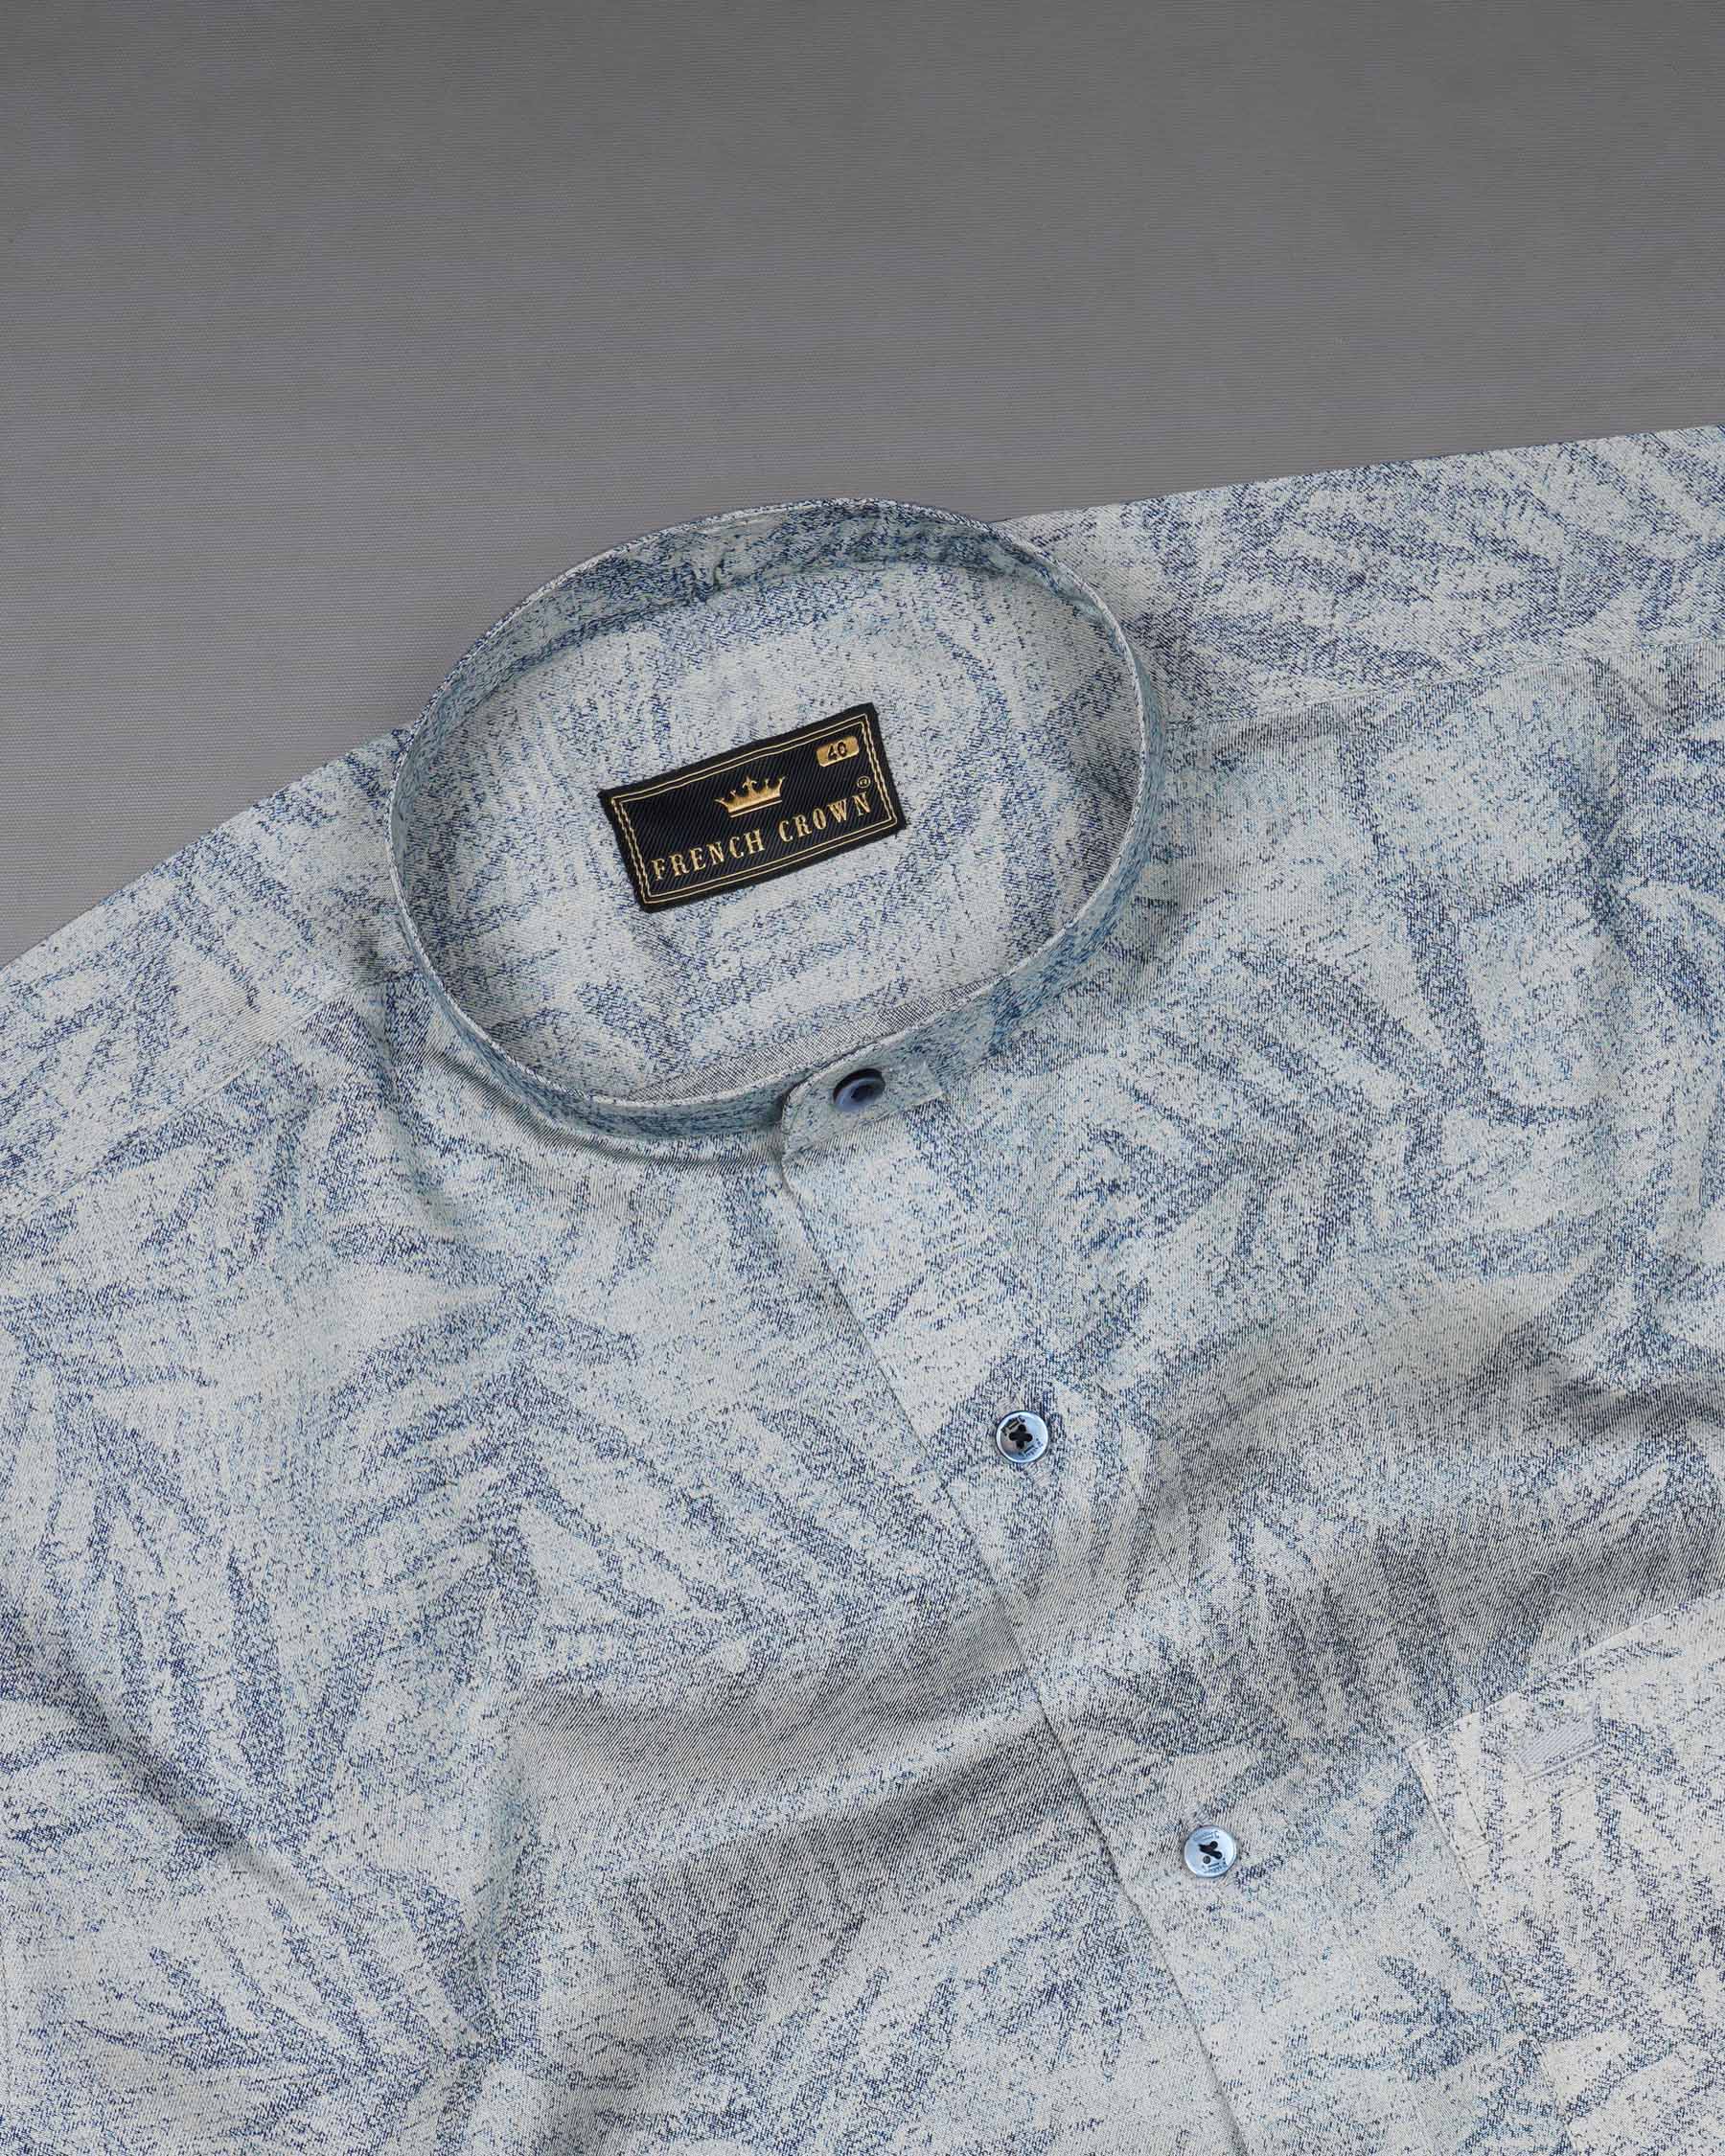 Raven Blue and Zircon Gray Leaves Textured Royal Oxford Shirt 7393-M-BLE-38,7393-M-BLE-38,7393-M-BLE-39,7393-M-BLE-39,7393-M-BLE-40,7393-M-BLE-40,7393-M-BLE-42,7393-M-BLE-42,7393-M-BLE-44,7393-M-BLE-44,7393-M-BLE-46,7393-M-BLE-46,7393-M-BLE-48,7393-M-BLE-48,7393-M-BLE-50,7393-M-BLE-50,7393-M-BLE-52,7393-M-BLE-52